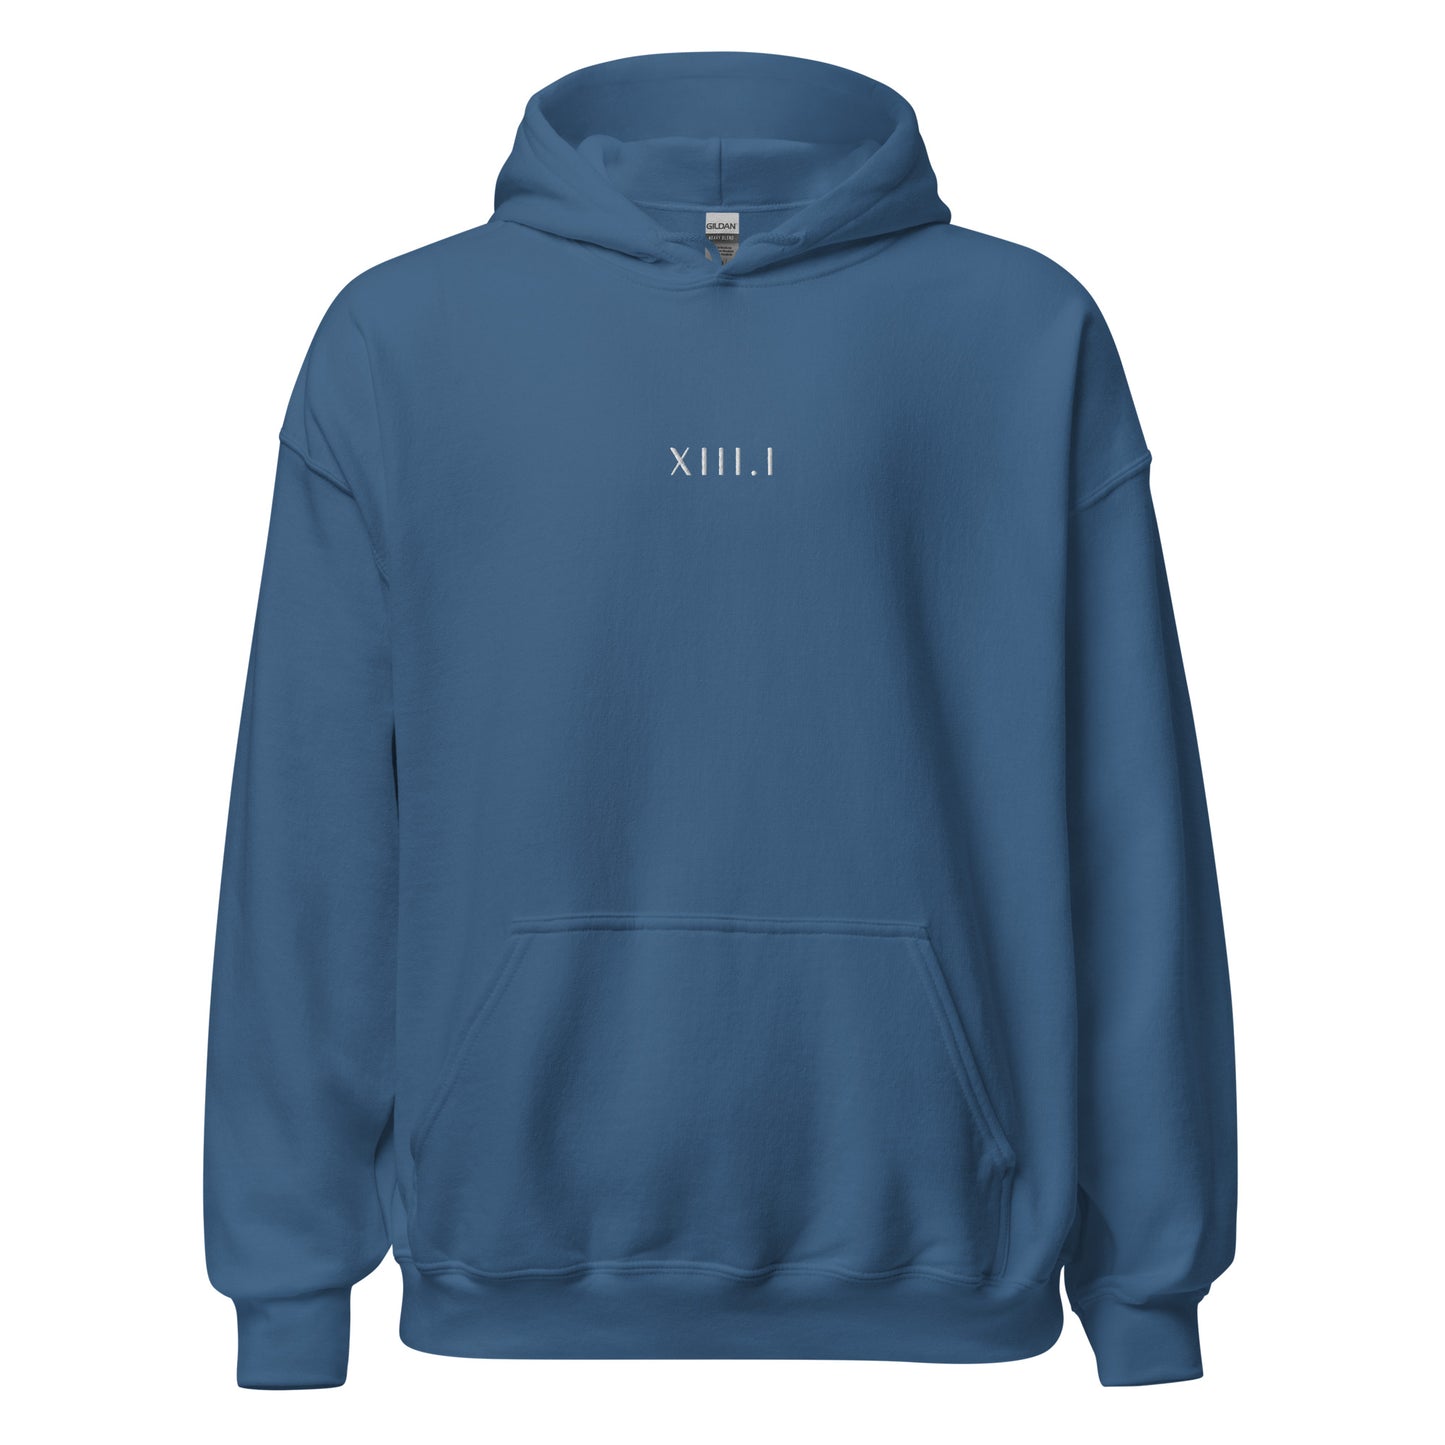 blue unisex hoodie with XIII.I 13.1 half marathon in roman numerals embroidered in white writing